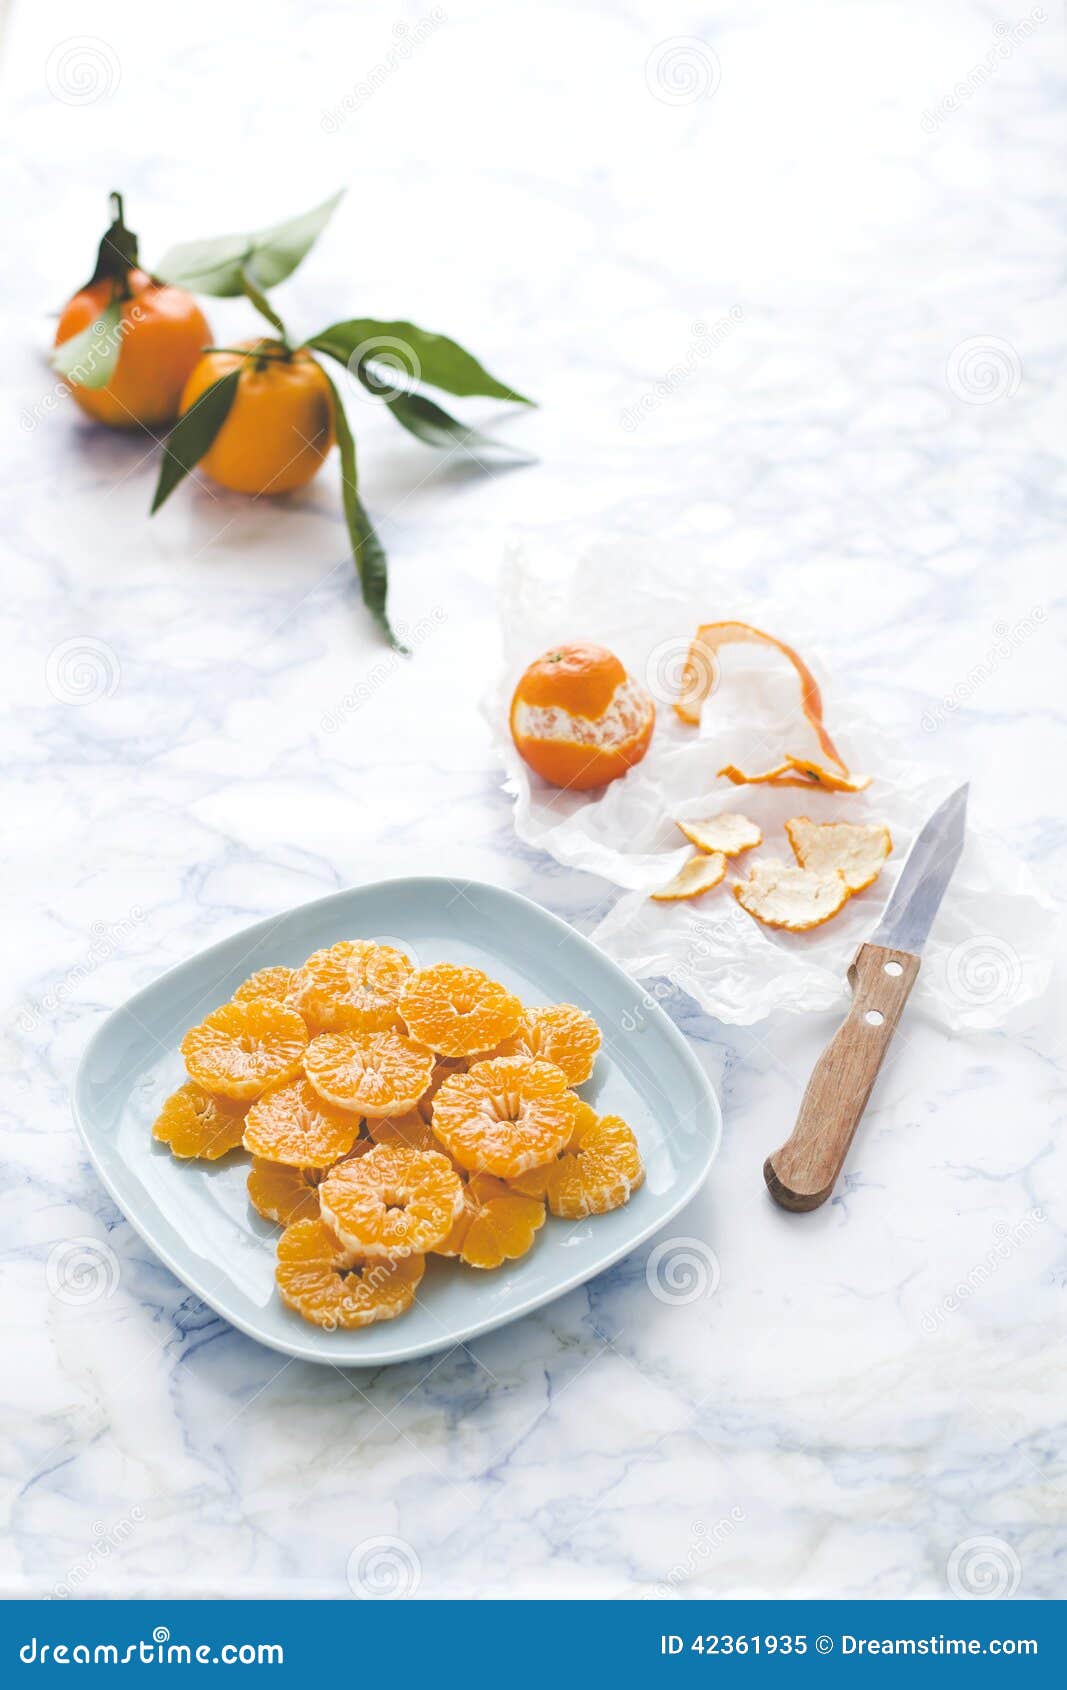 Tangerines salad. Sliced and peeled tangerines on a little plate with wooden knife and other tangerines